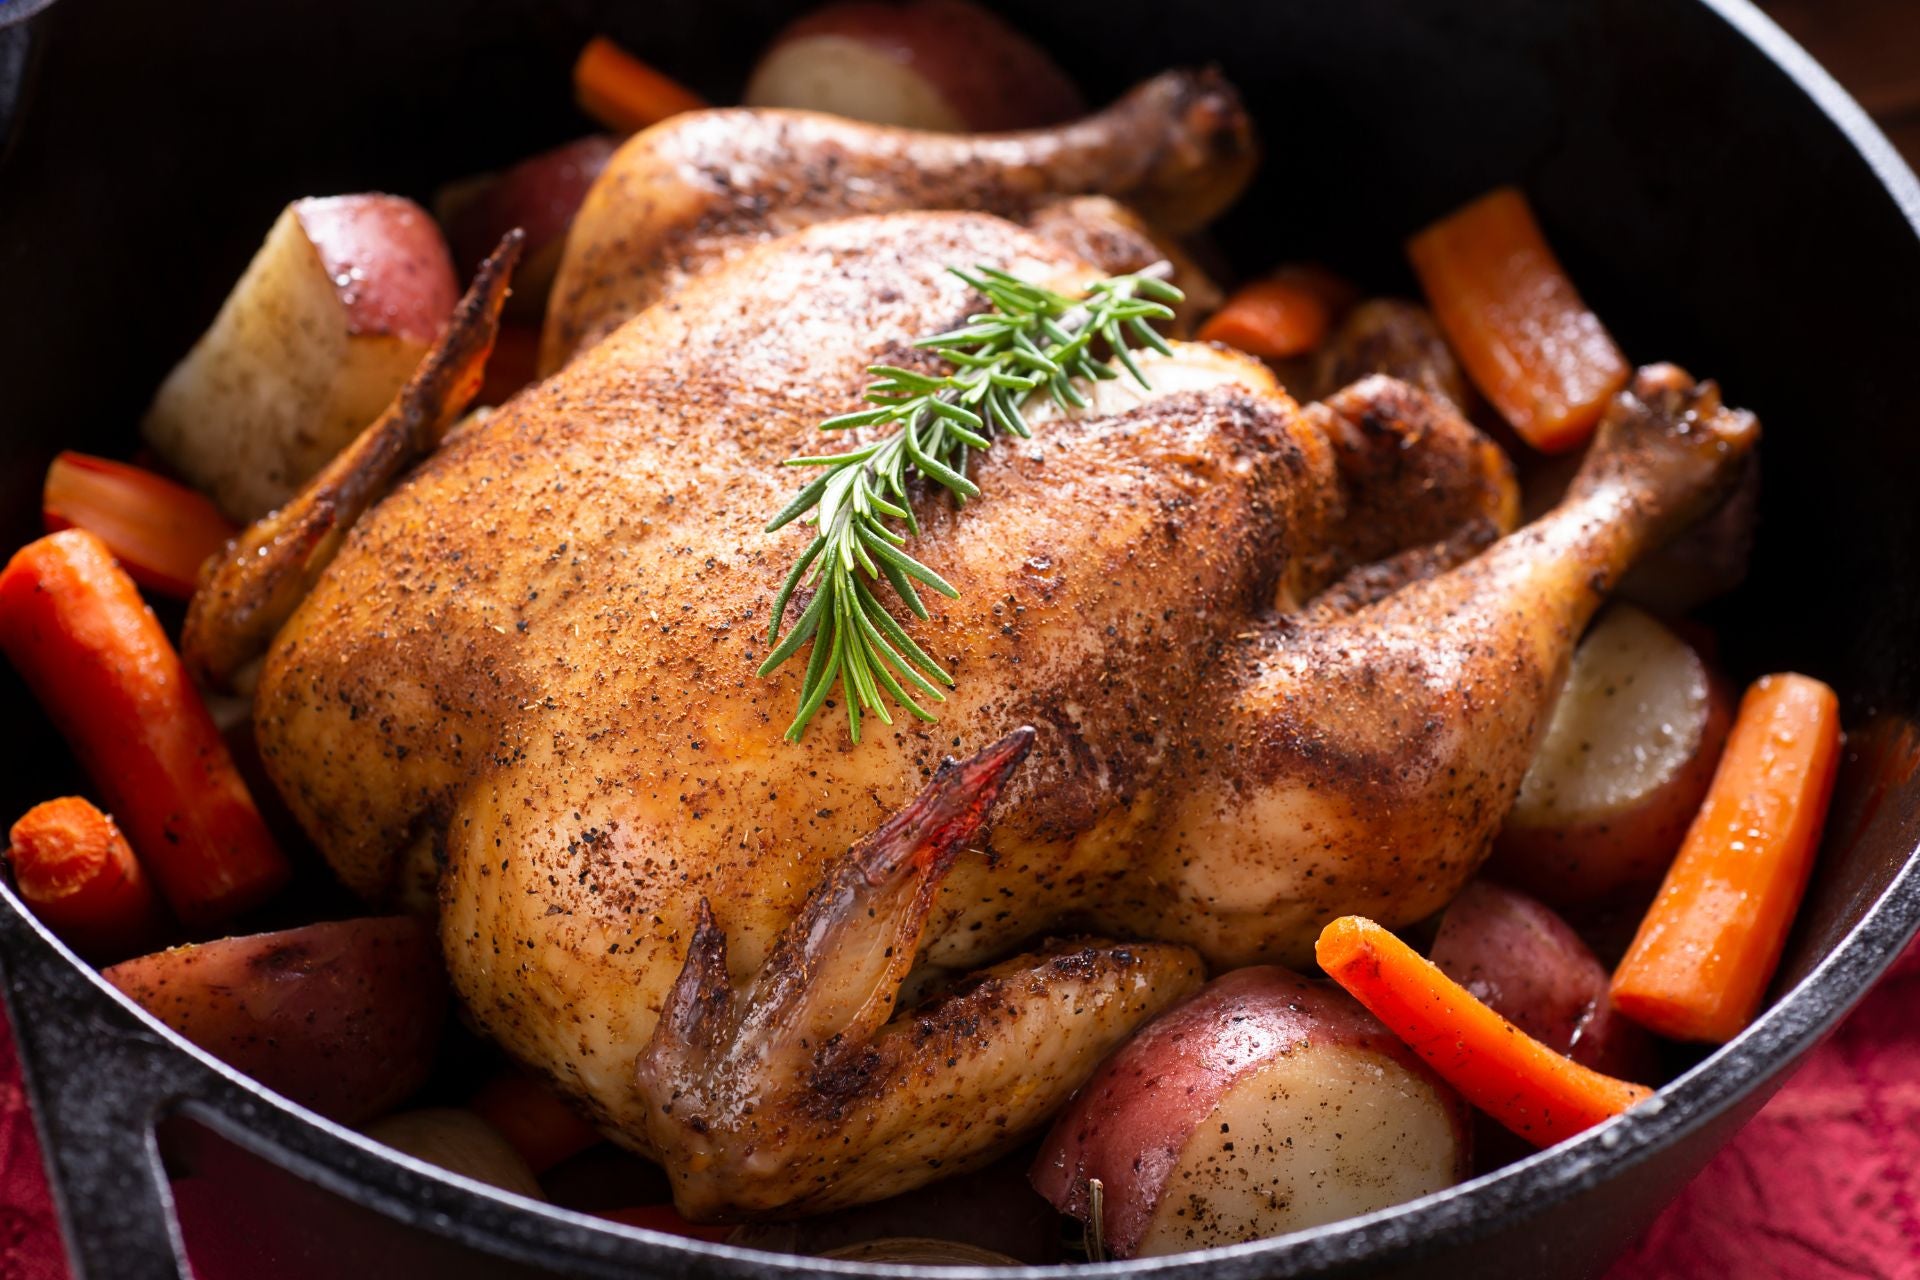 A roasted chicken, carrots, and potatoes cooked in a Dutch oven